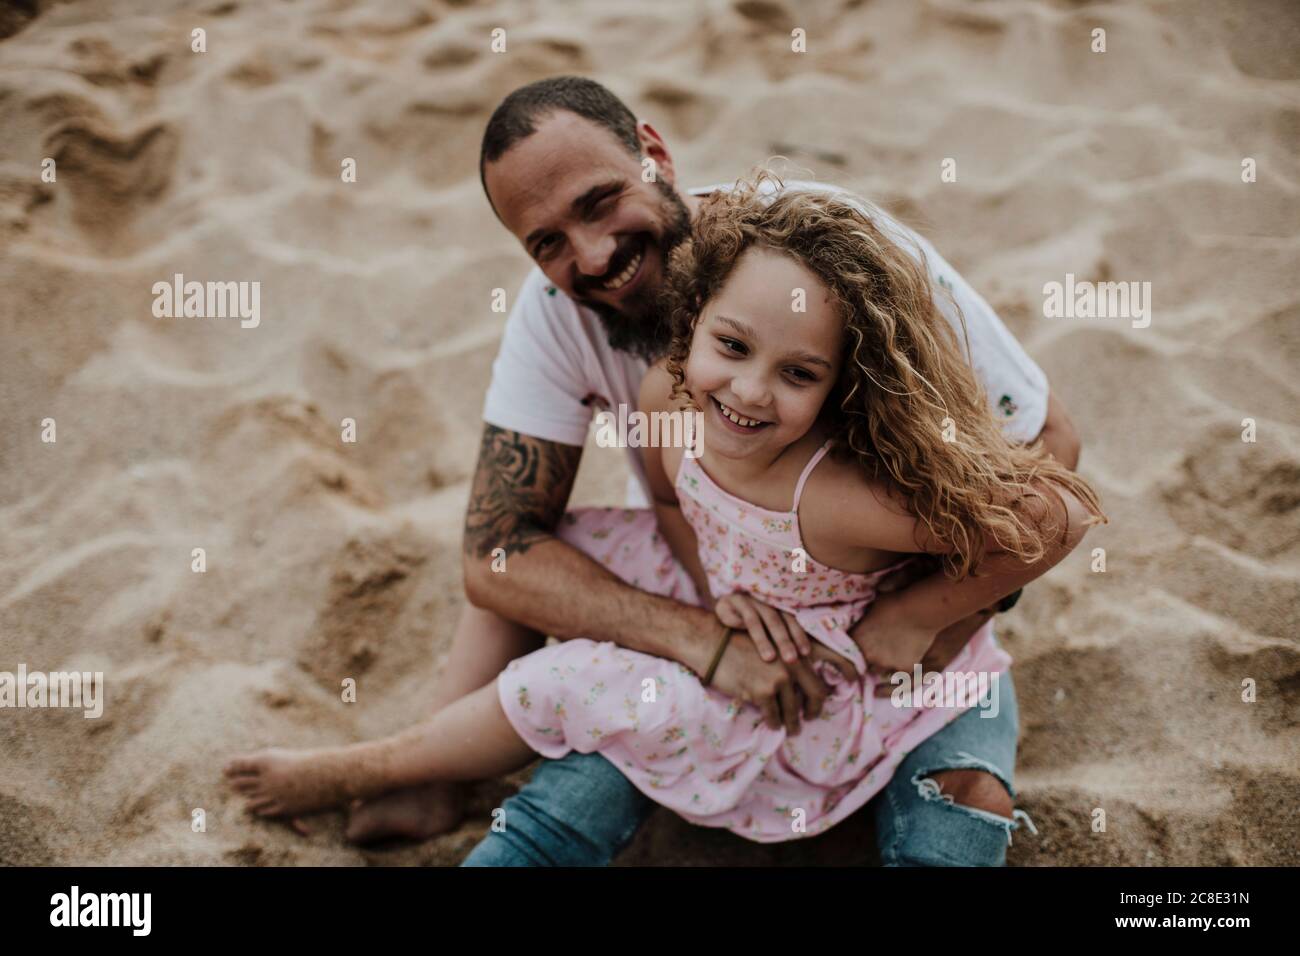 Daughter sitting on father's lap while playing at beach Stock Photo